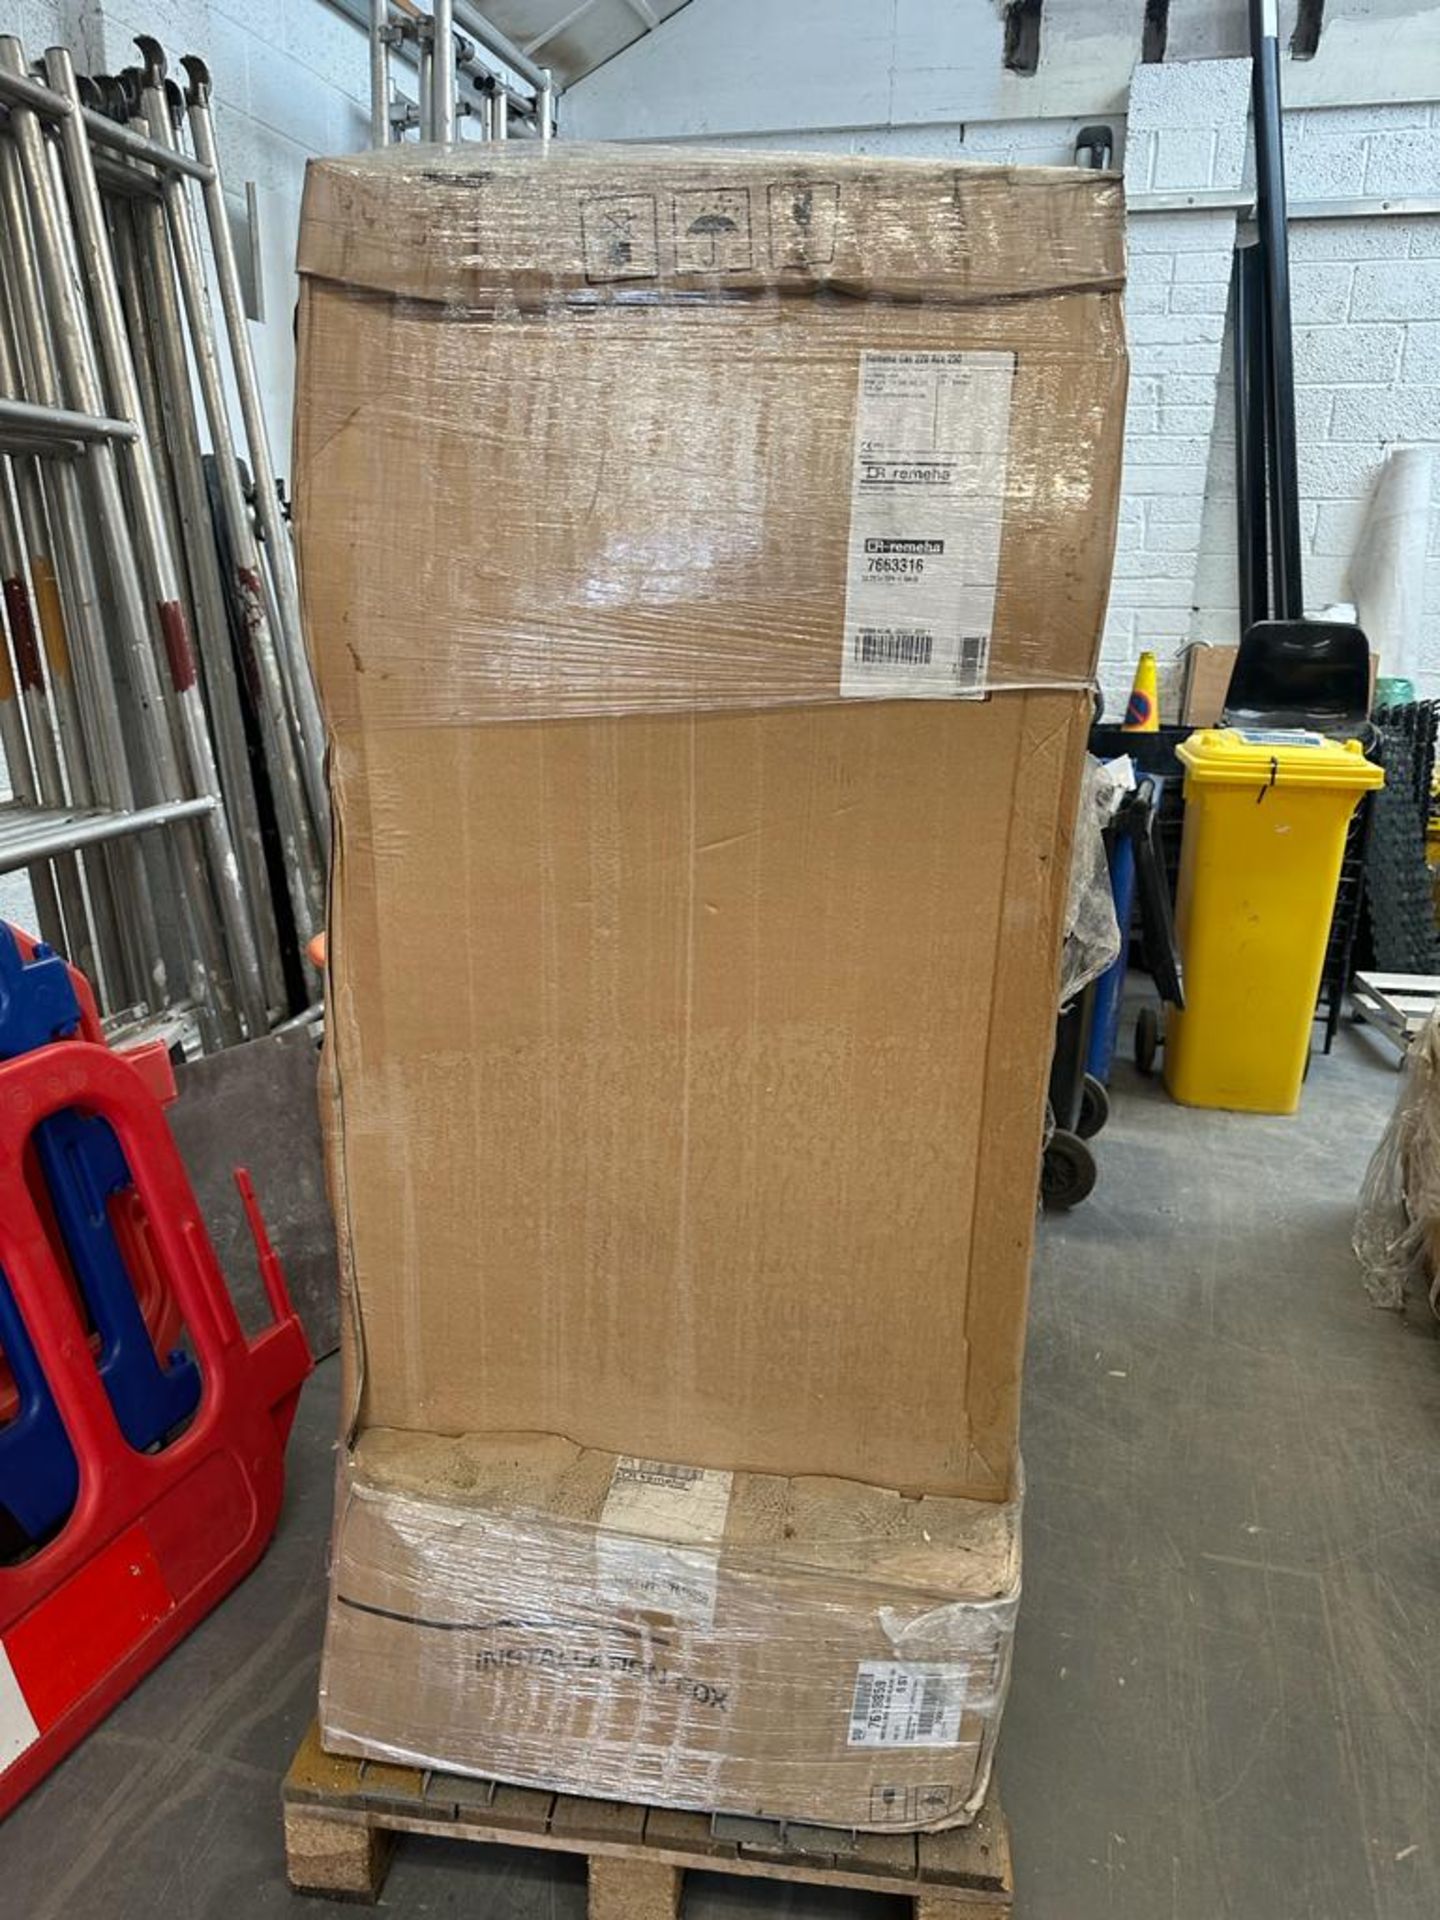 REMEHA GAS 220 ACE 250KW - New generation floor-standing boiler - brand new in box, wrapped. - Image 2 of 2